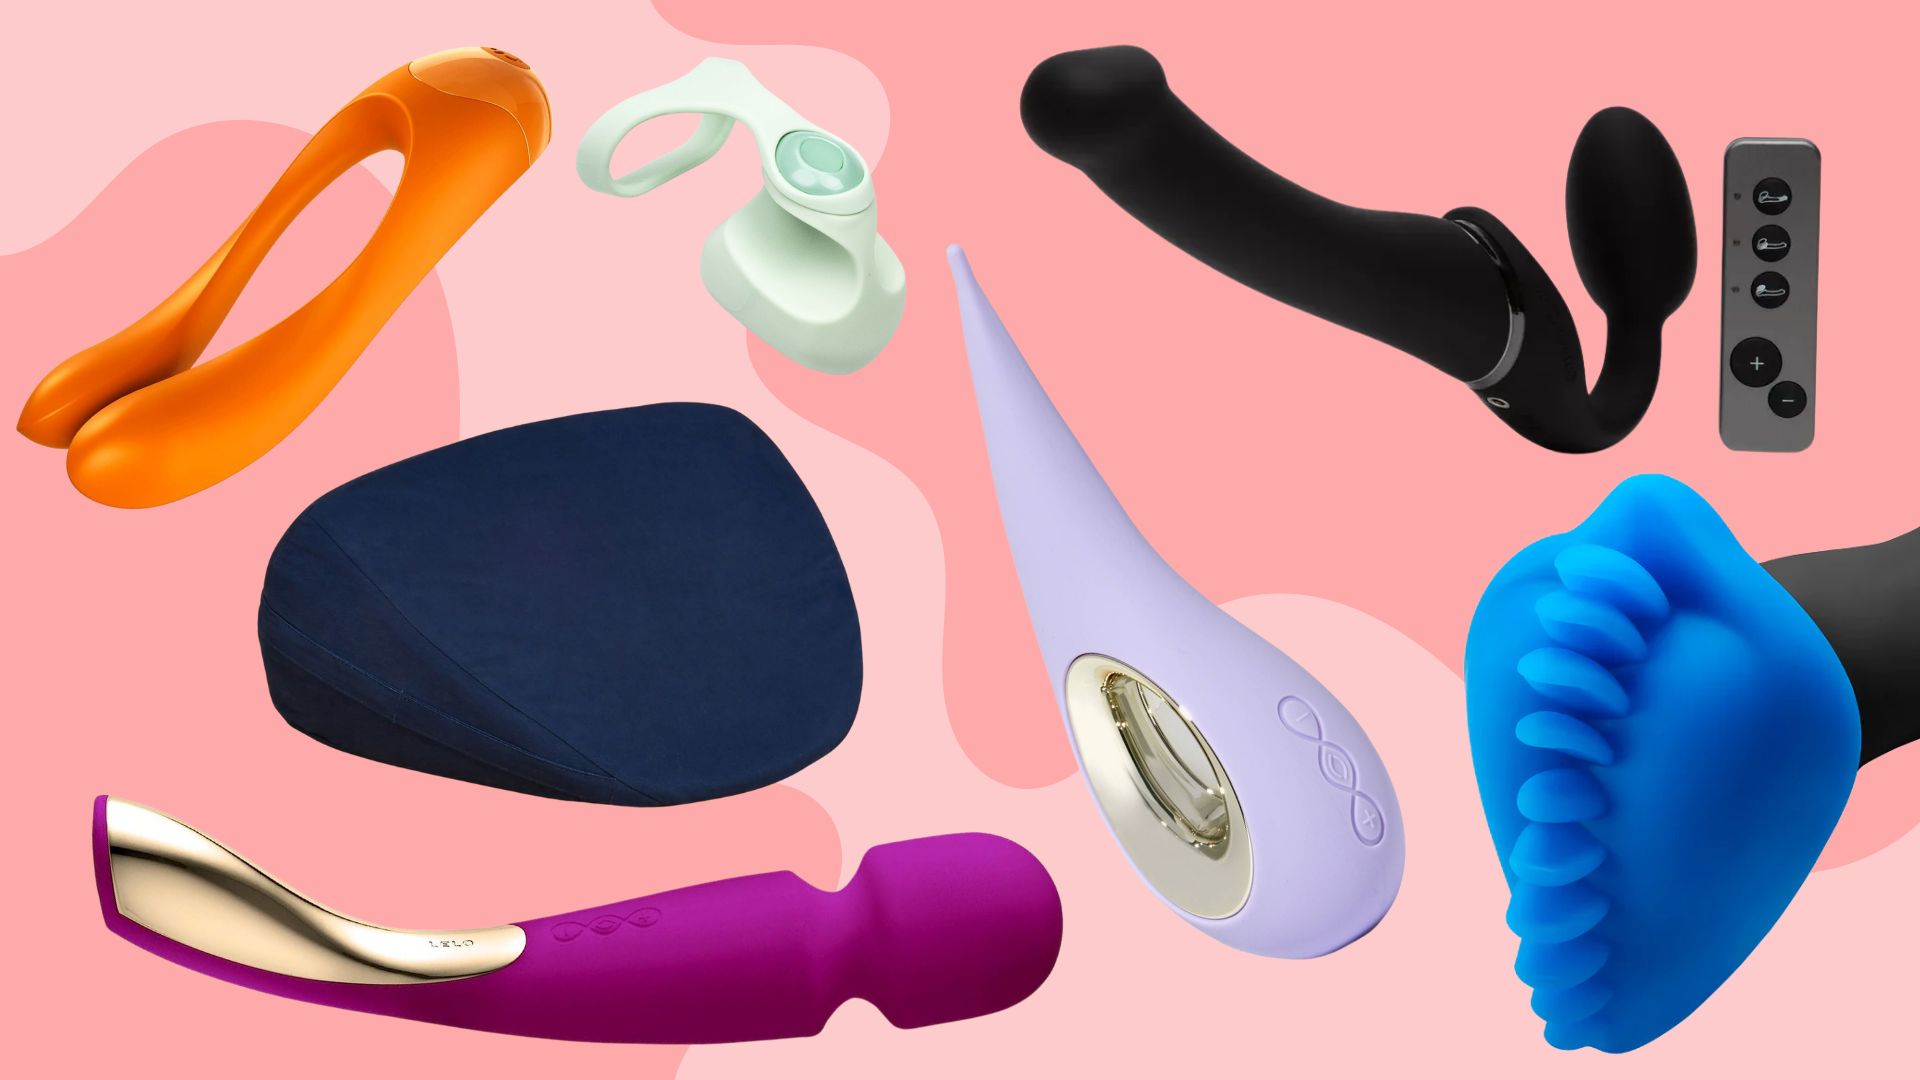 14 lesbian sex toys, dildos, and vibrators tested by us Woman and Home image